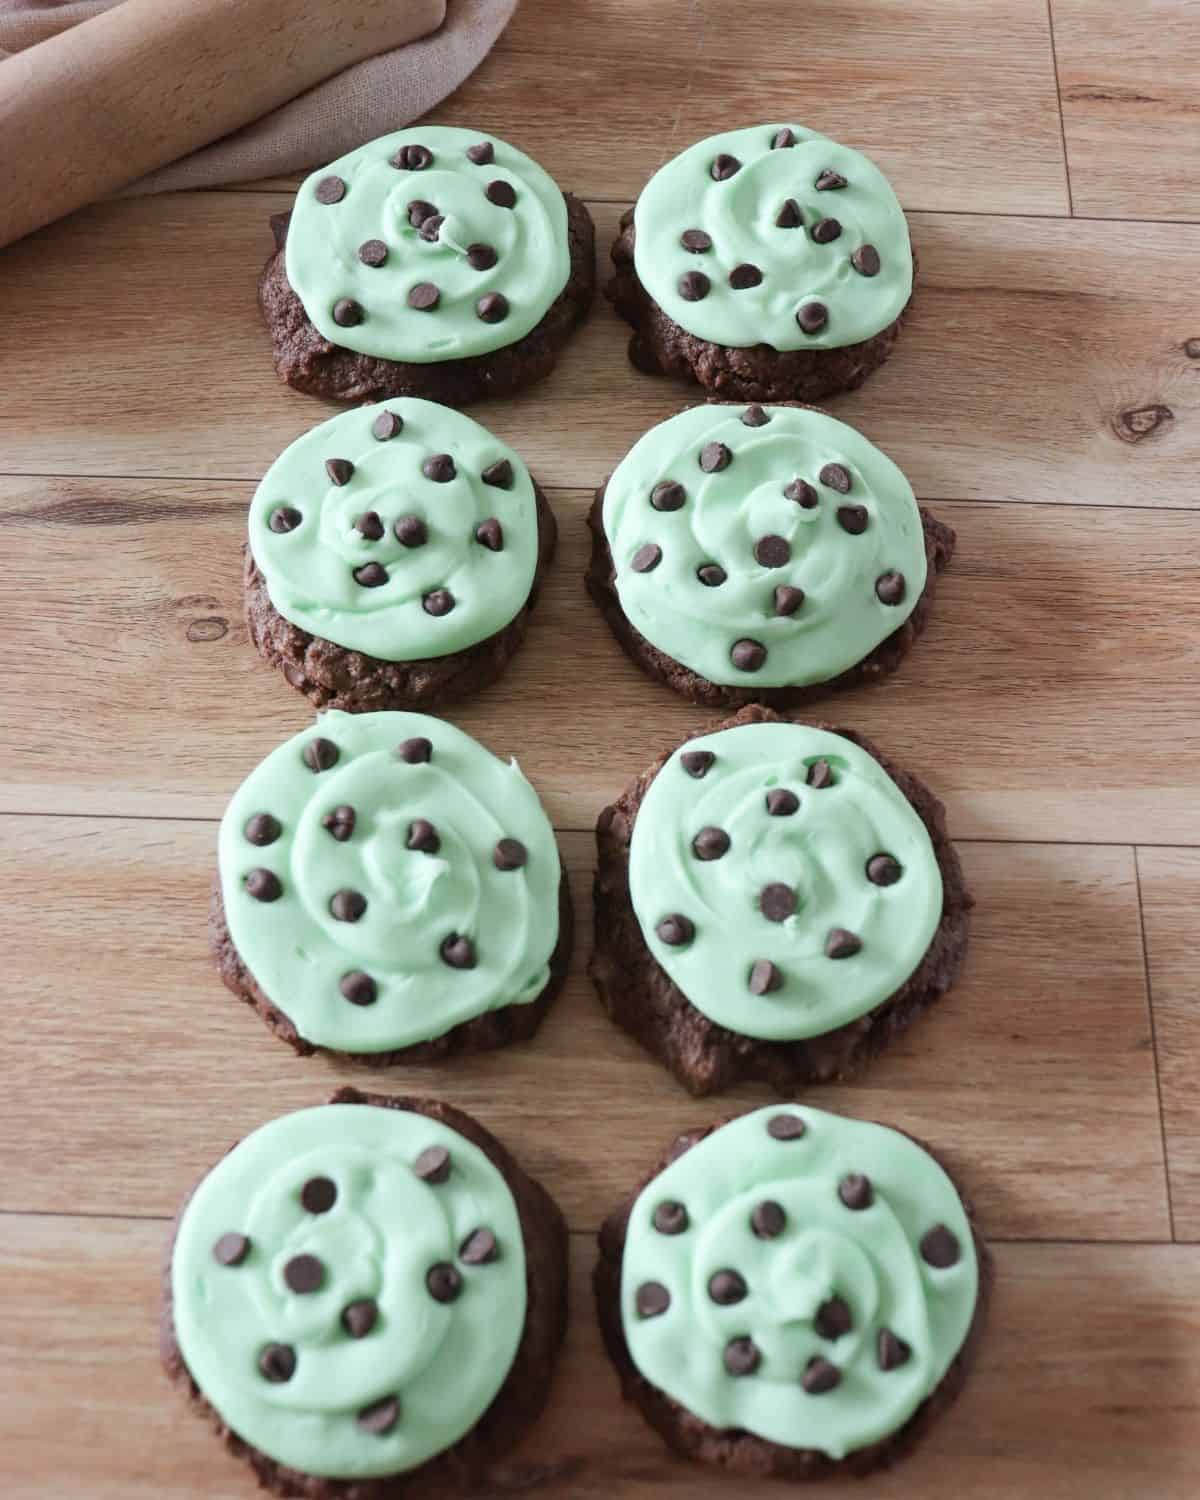 Chocolate cookies with a green frosting and small chocolate chips on top of the cookis.